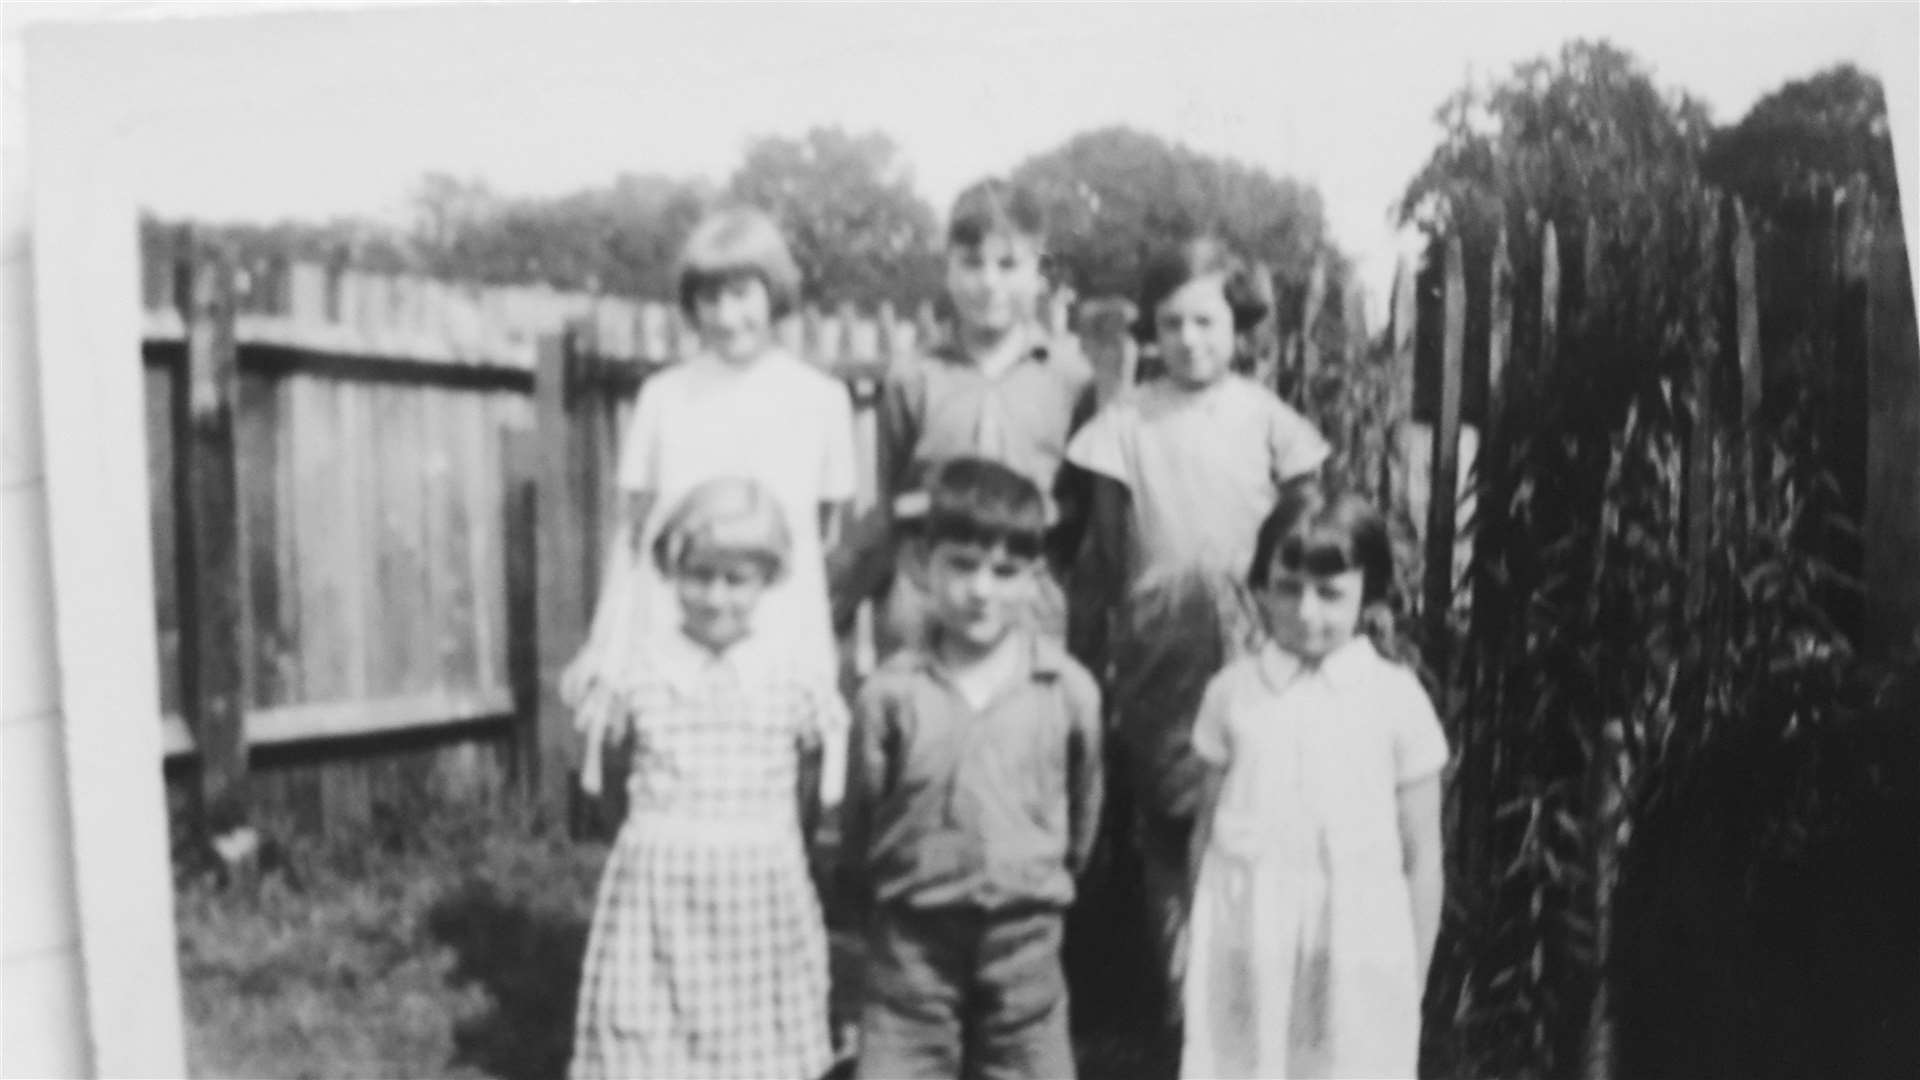 Frances (back row, far right) and Frank (back row, middle) were friends from an early age.